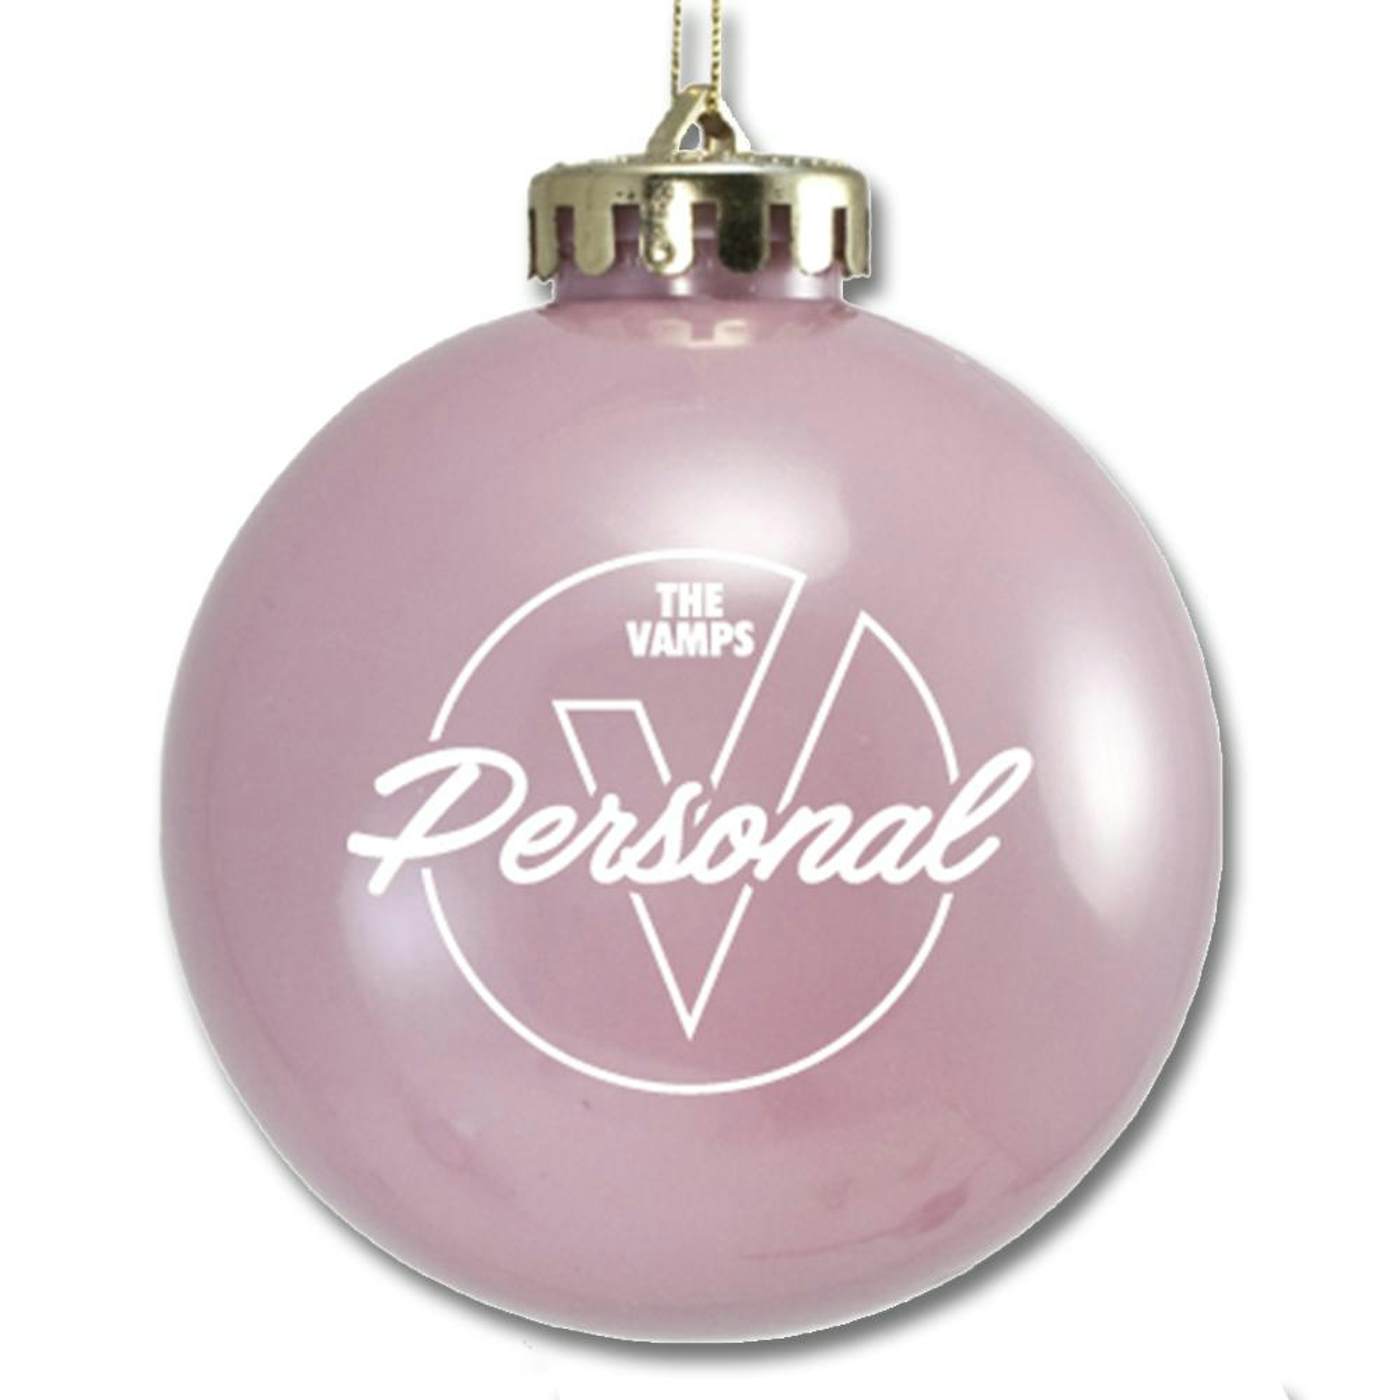 The Vamps "Personal" Holiday Ornament